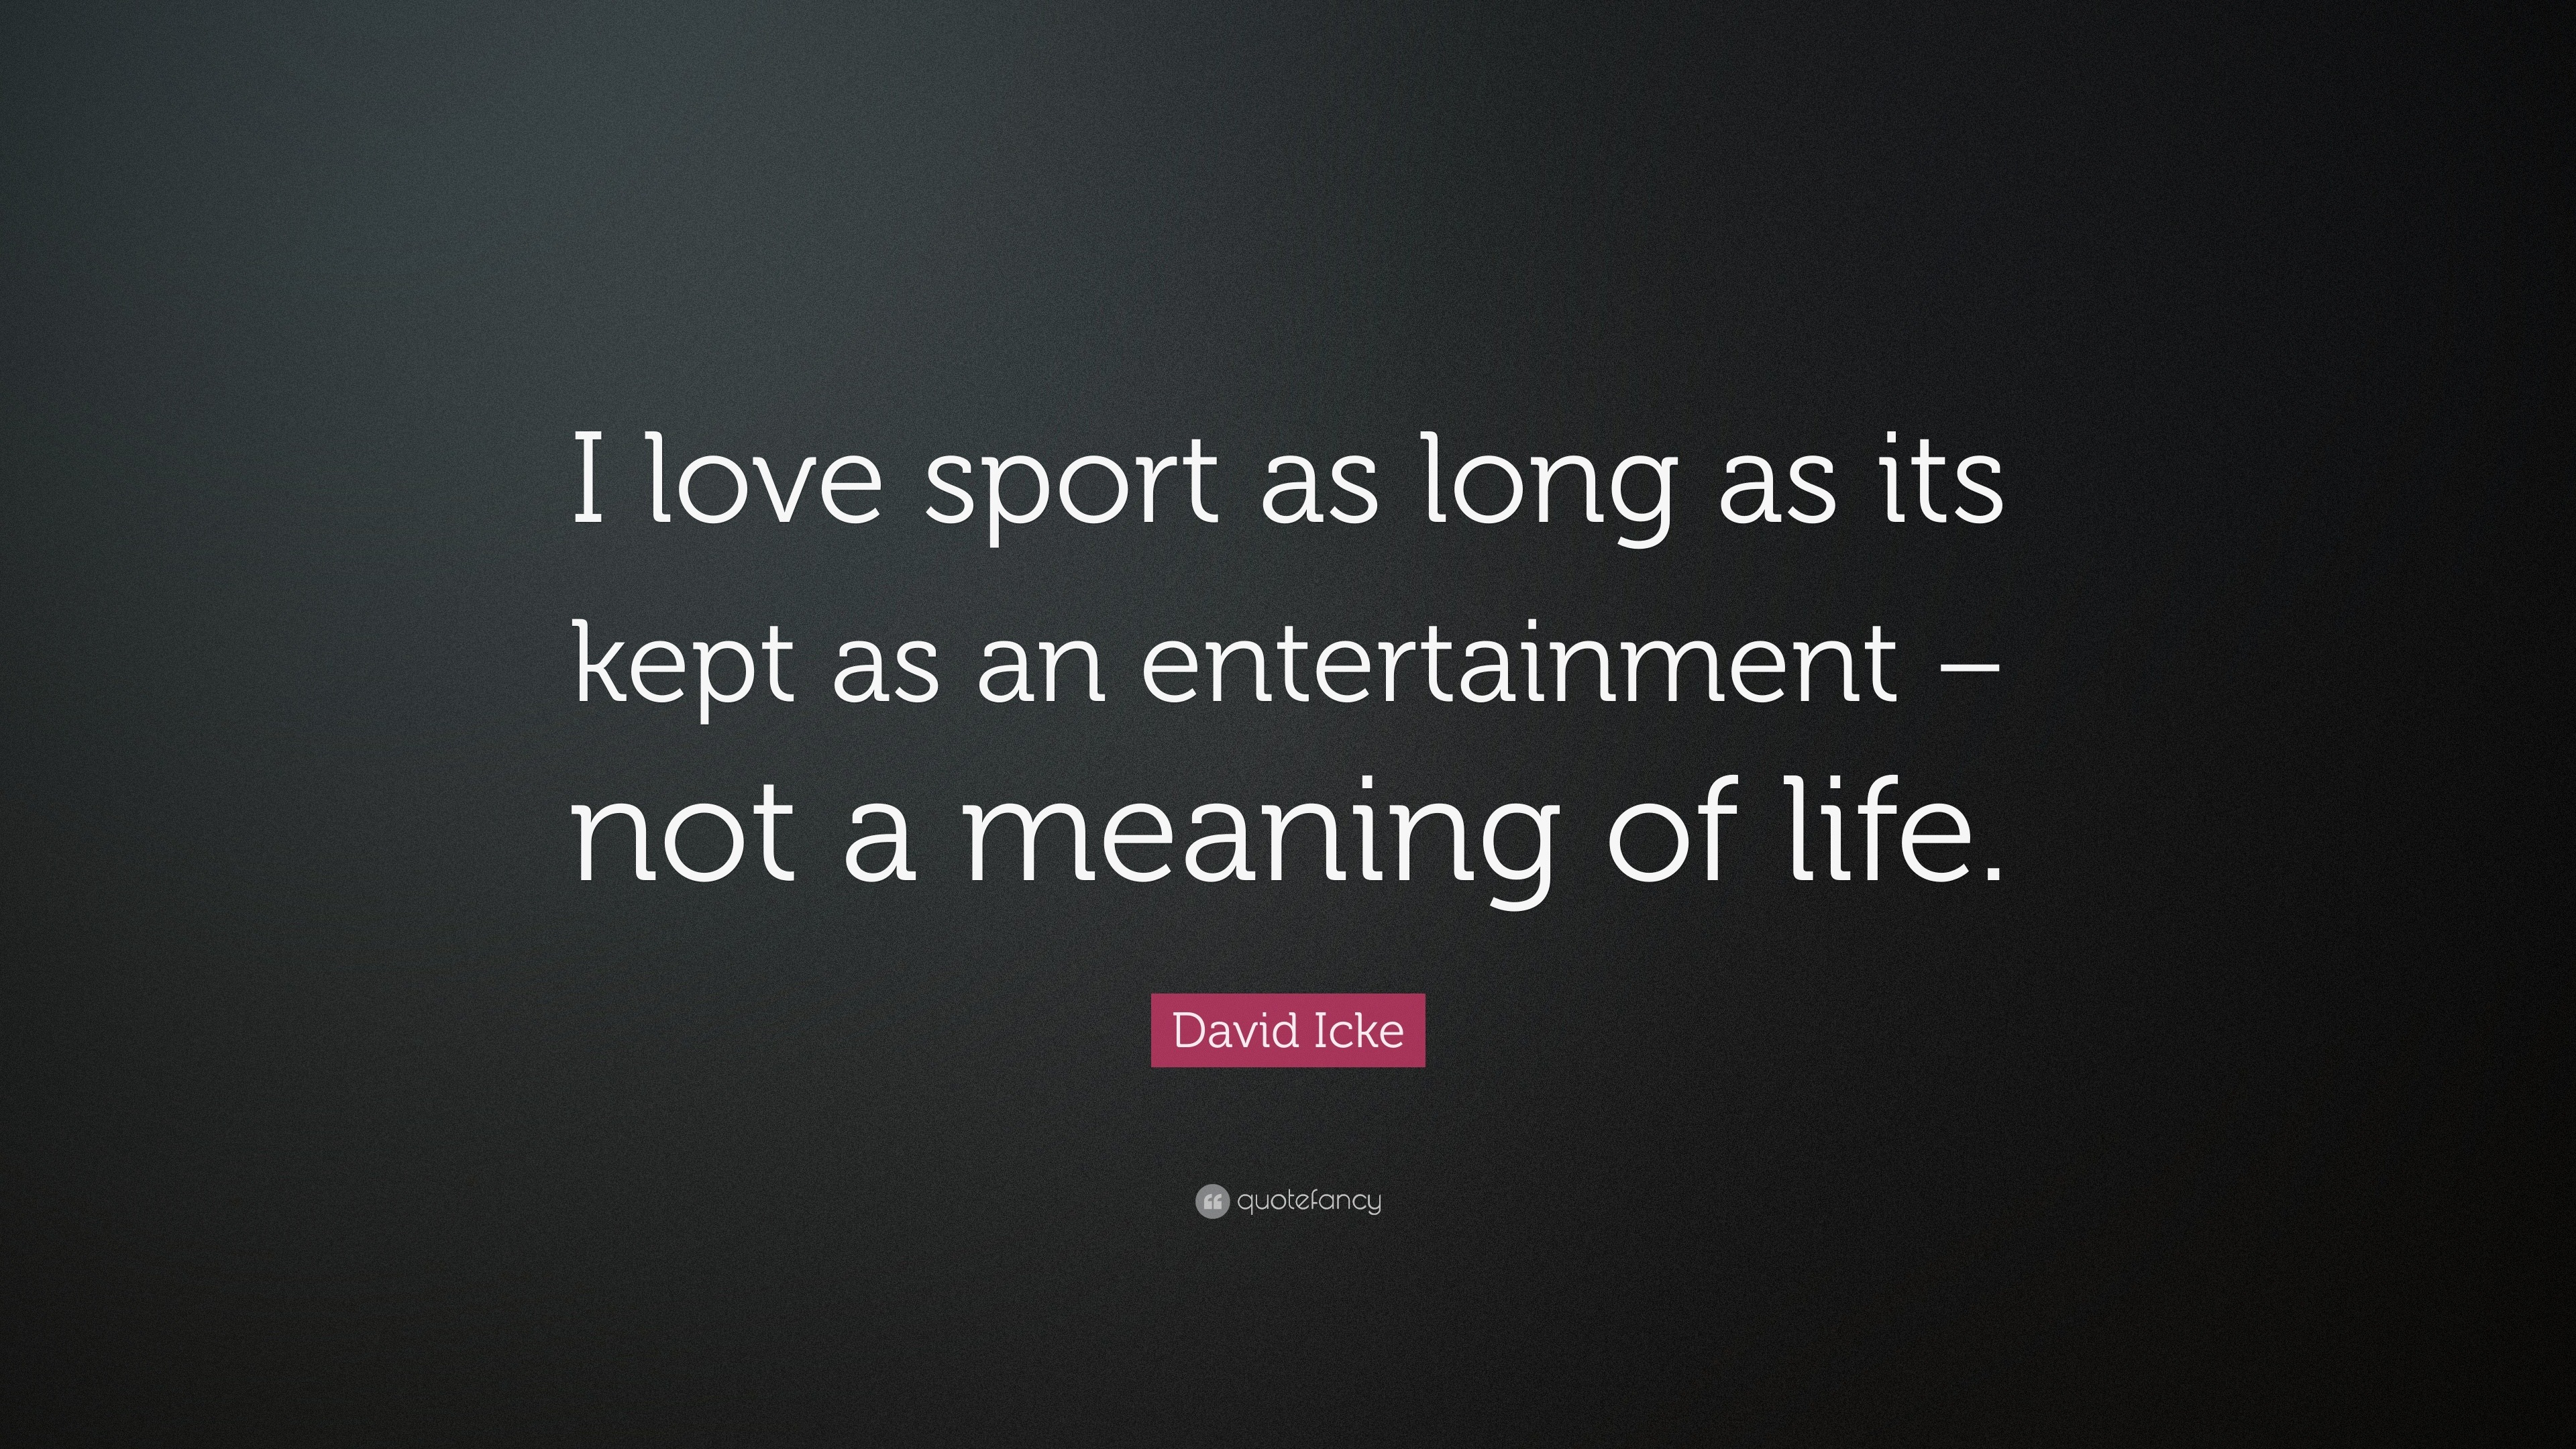 David Icke Quote “I love sport as long as its kept as an entertainment